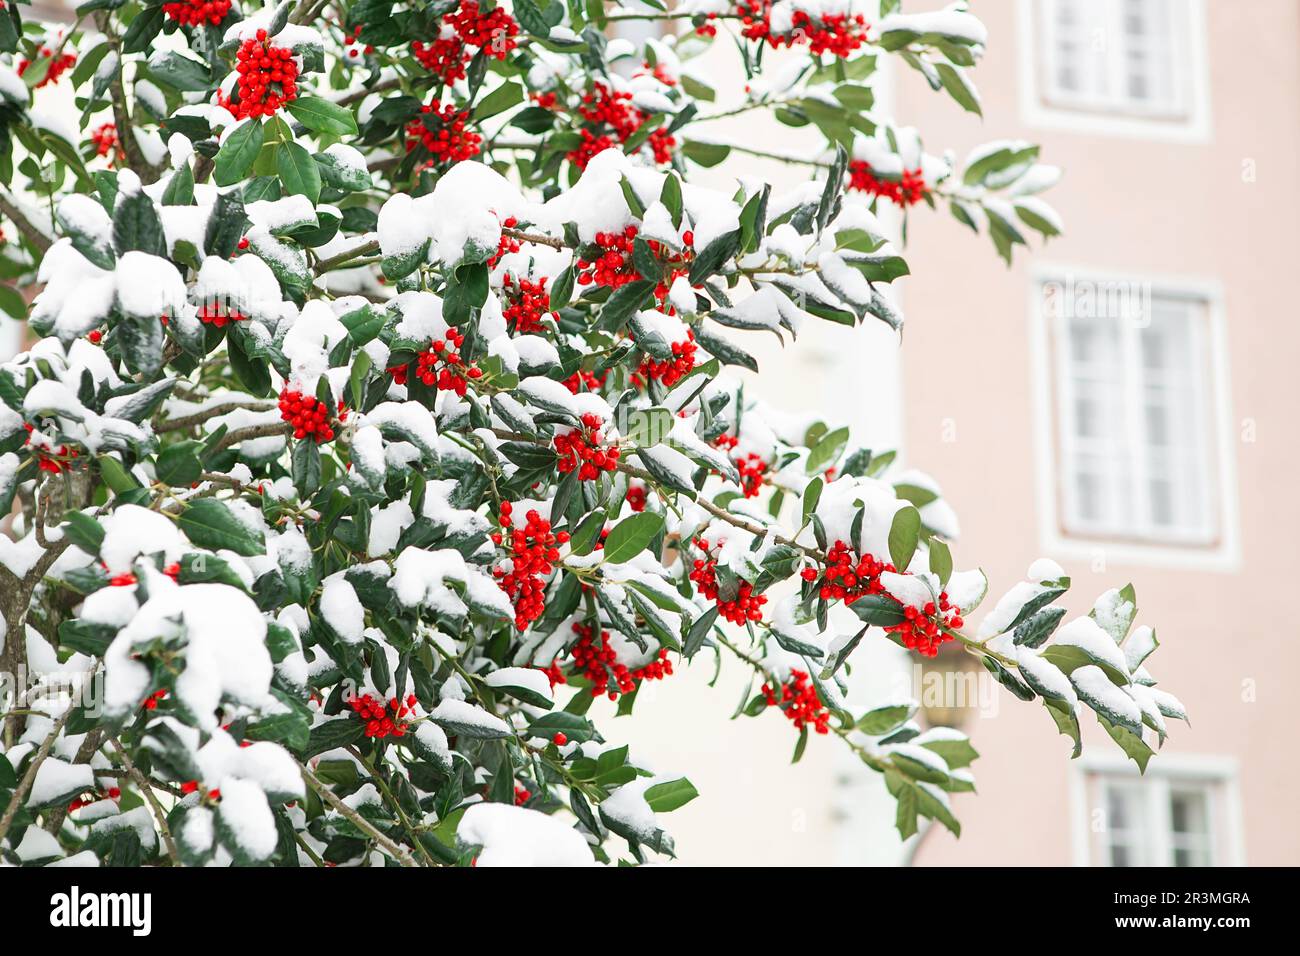 Christmas Holly red berries, Ilex aquifolium plant. Holly green foliage with mature red berries. Ilex aquifolium or Christmas ho Stock Photo